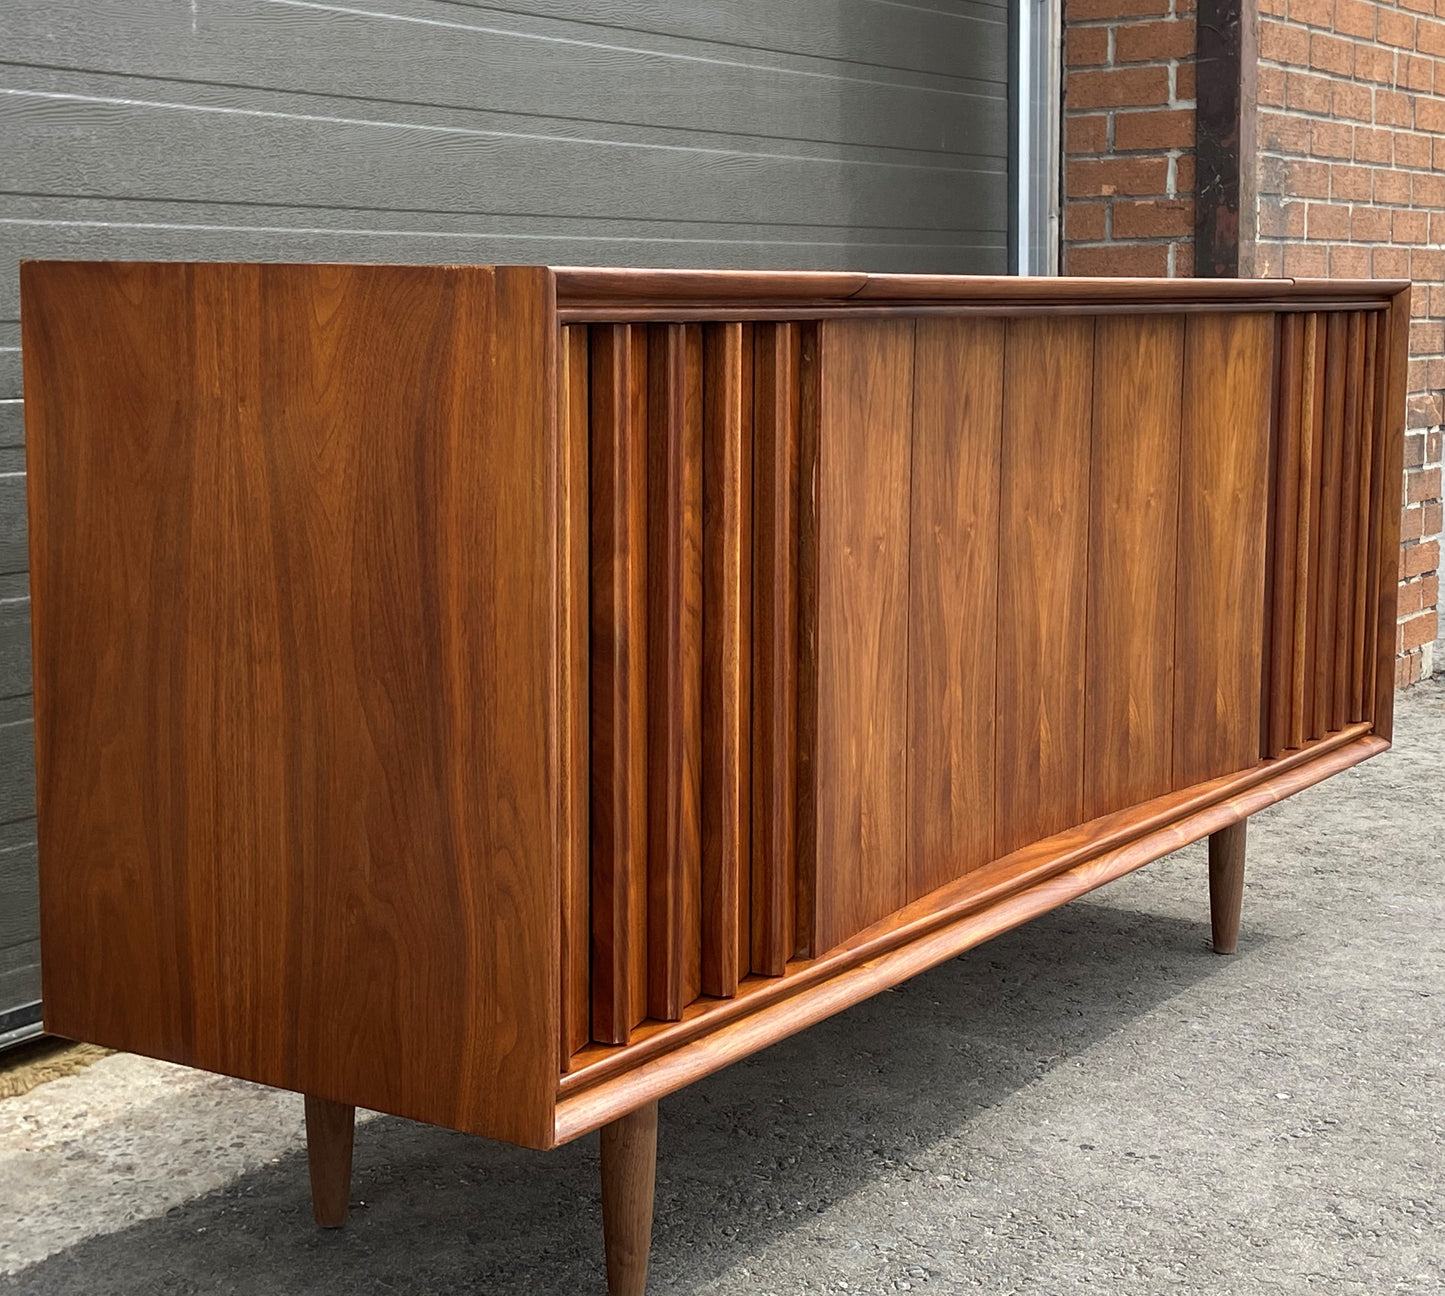 REFINISHED MCM Walnut Stereo Media Record Player Console , PERFECT